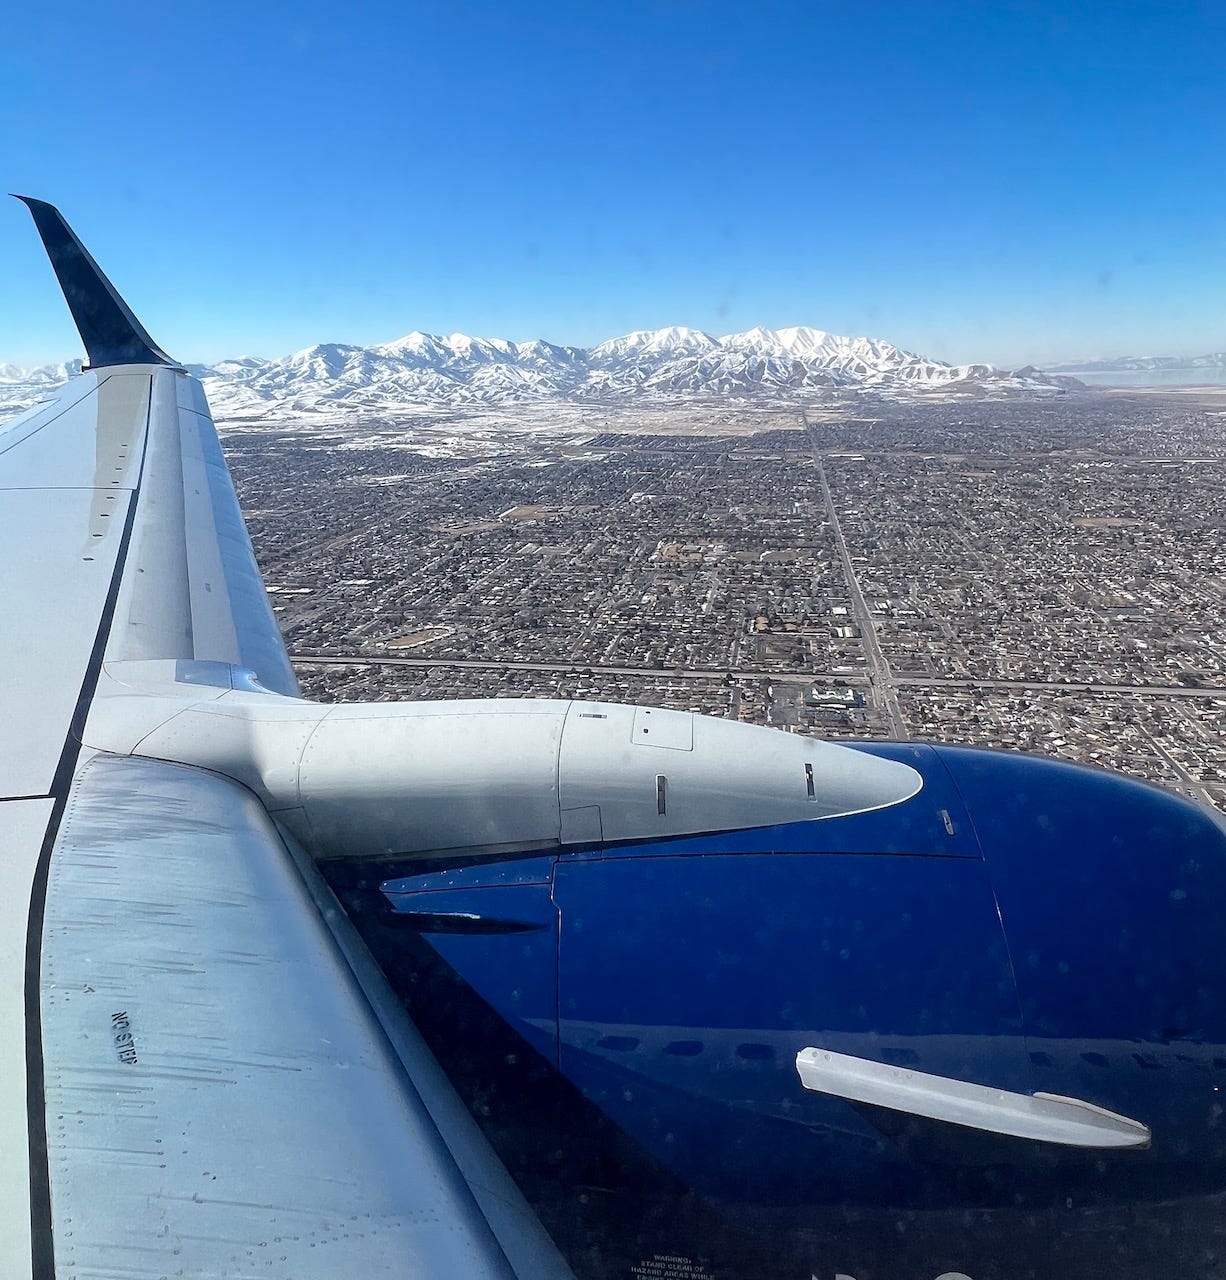 The views flying into Salt Lake City were spectacular.